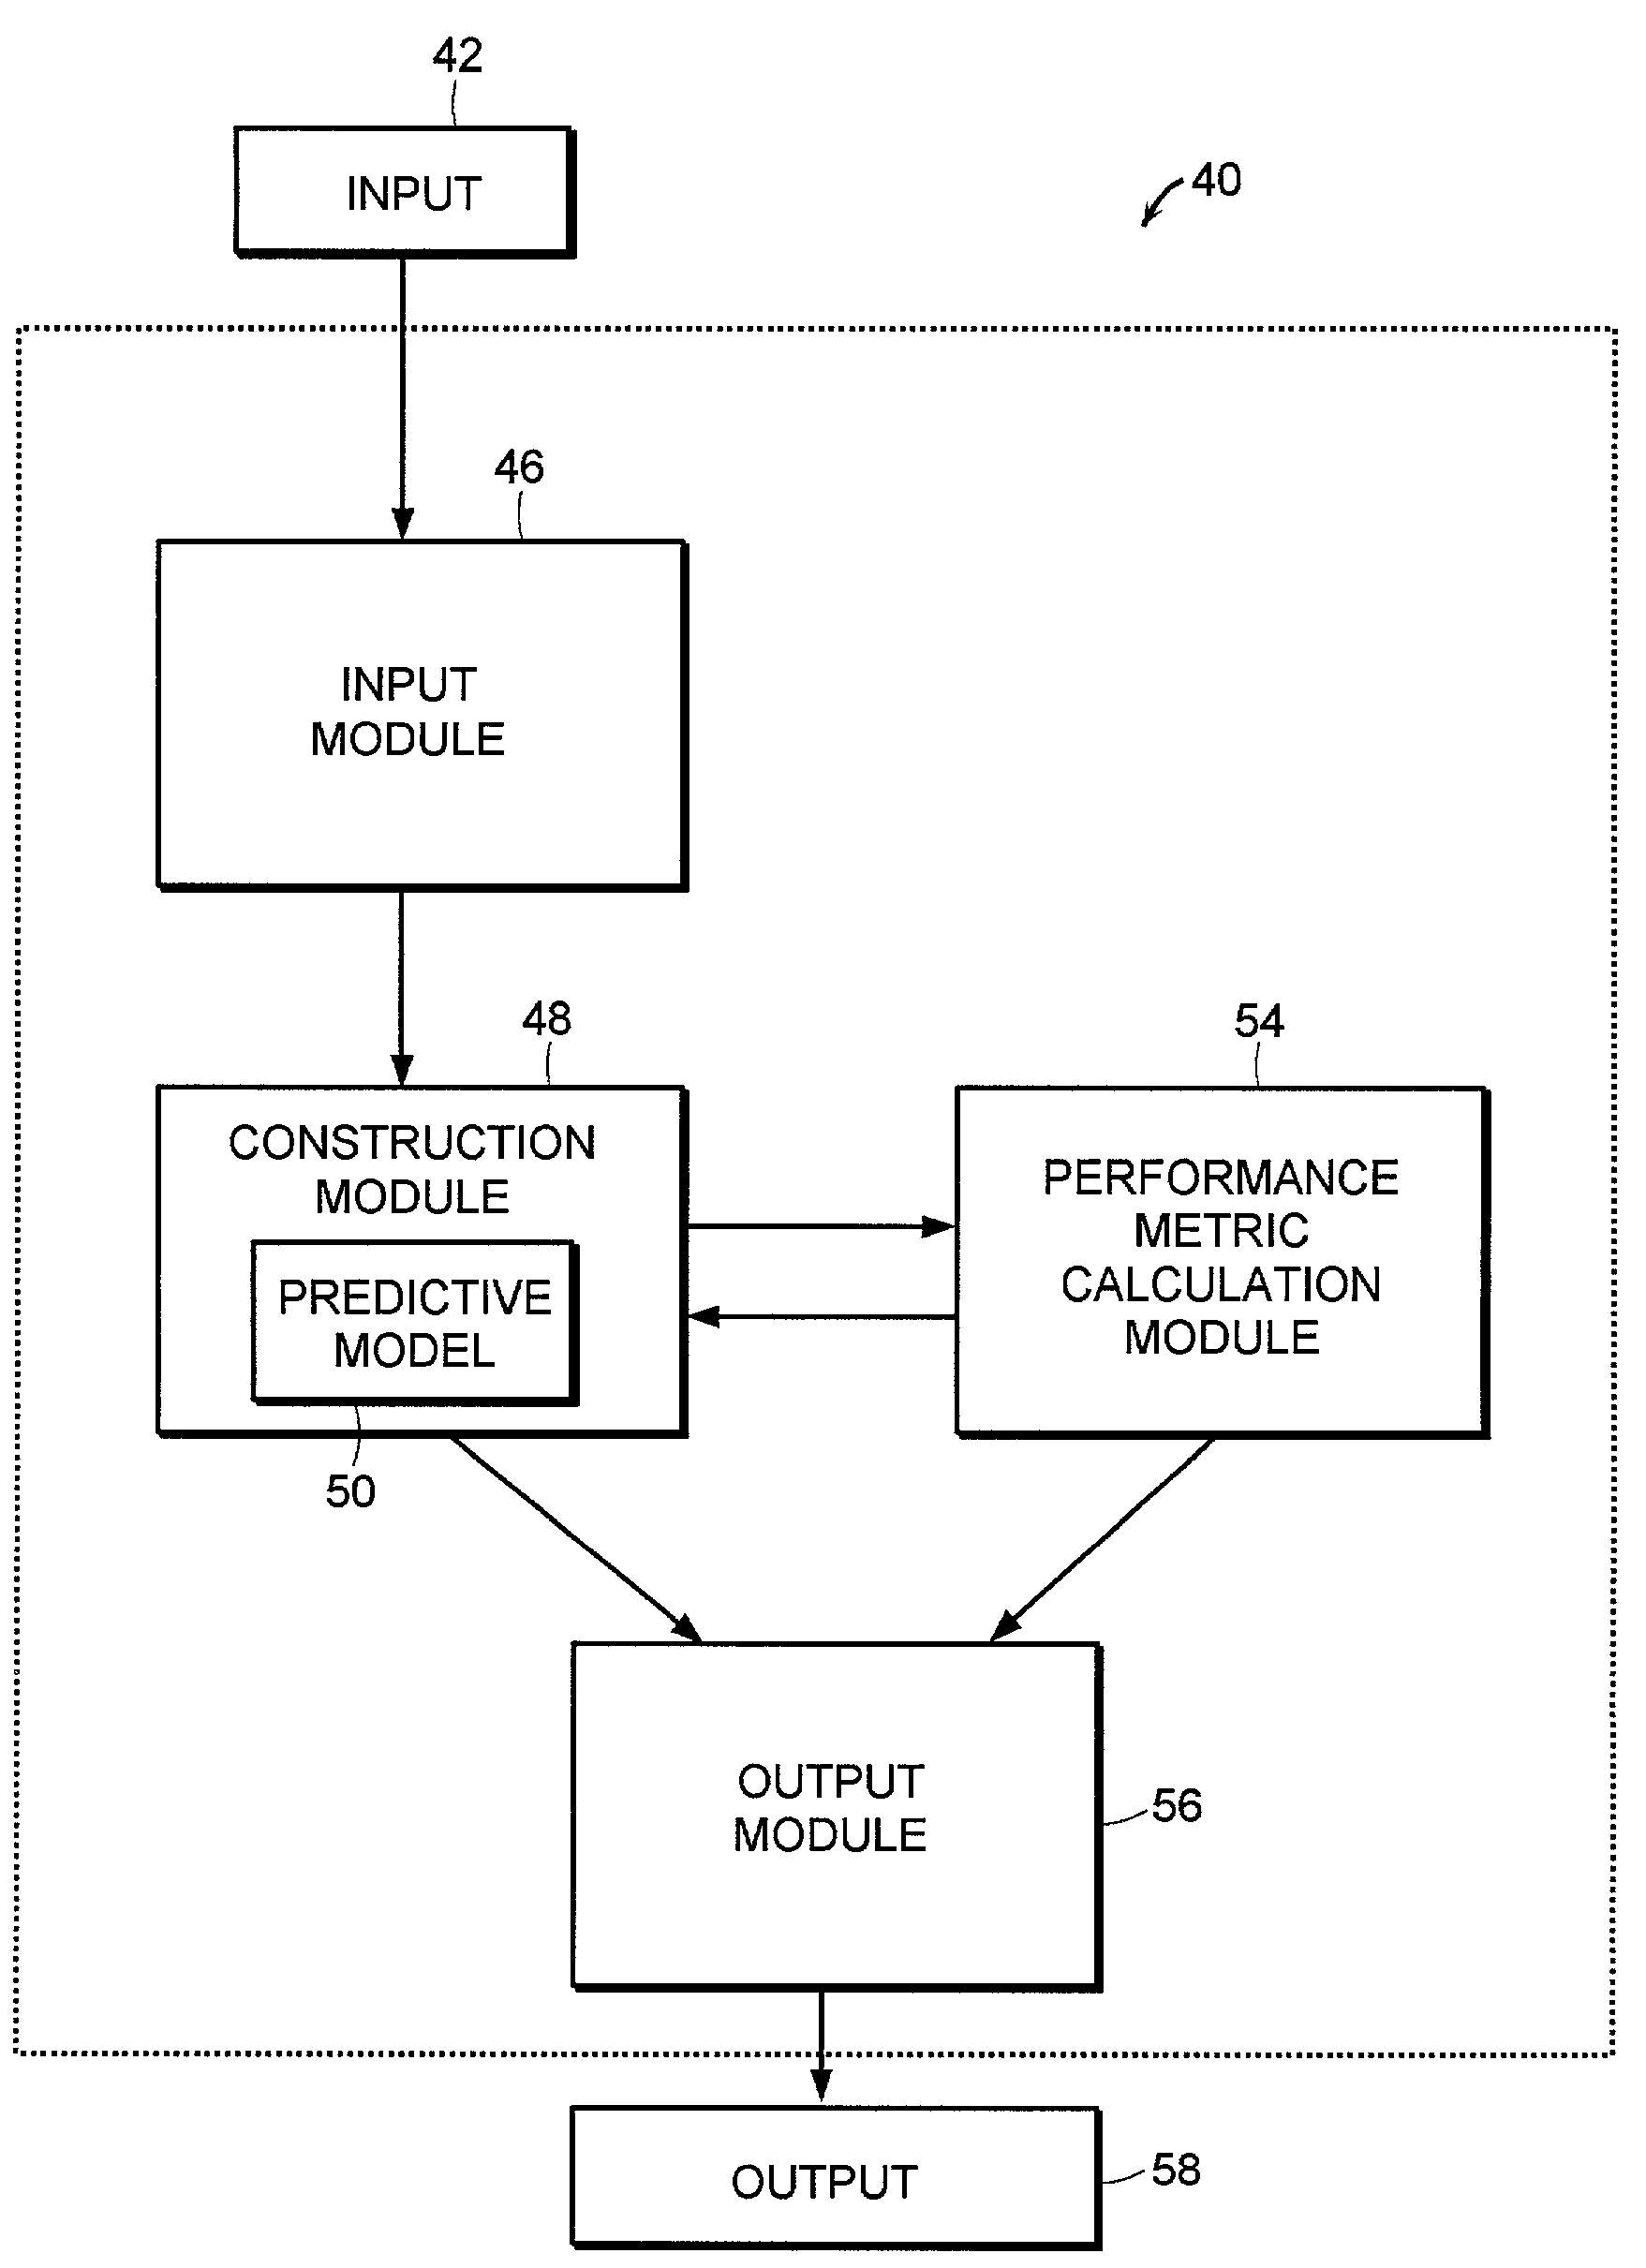 System and method for improving predictive modeling of an information system